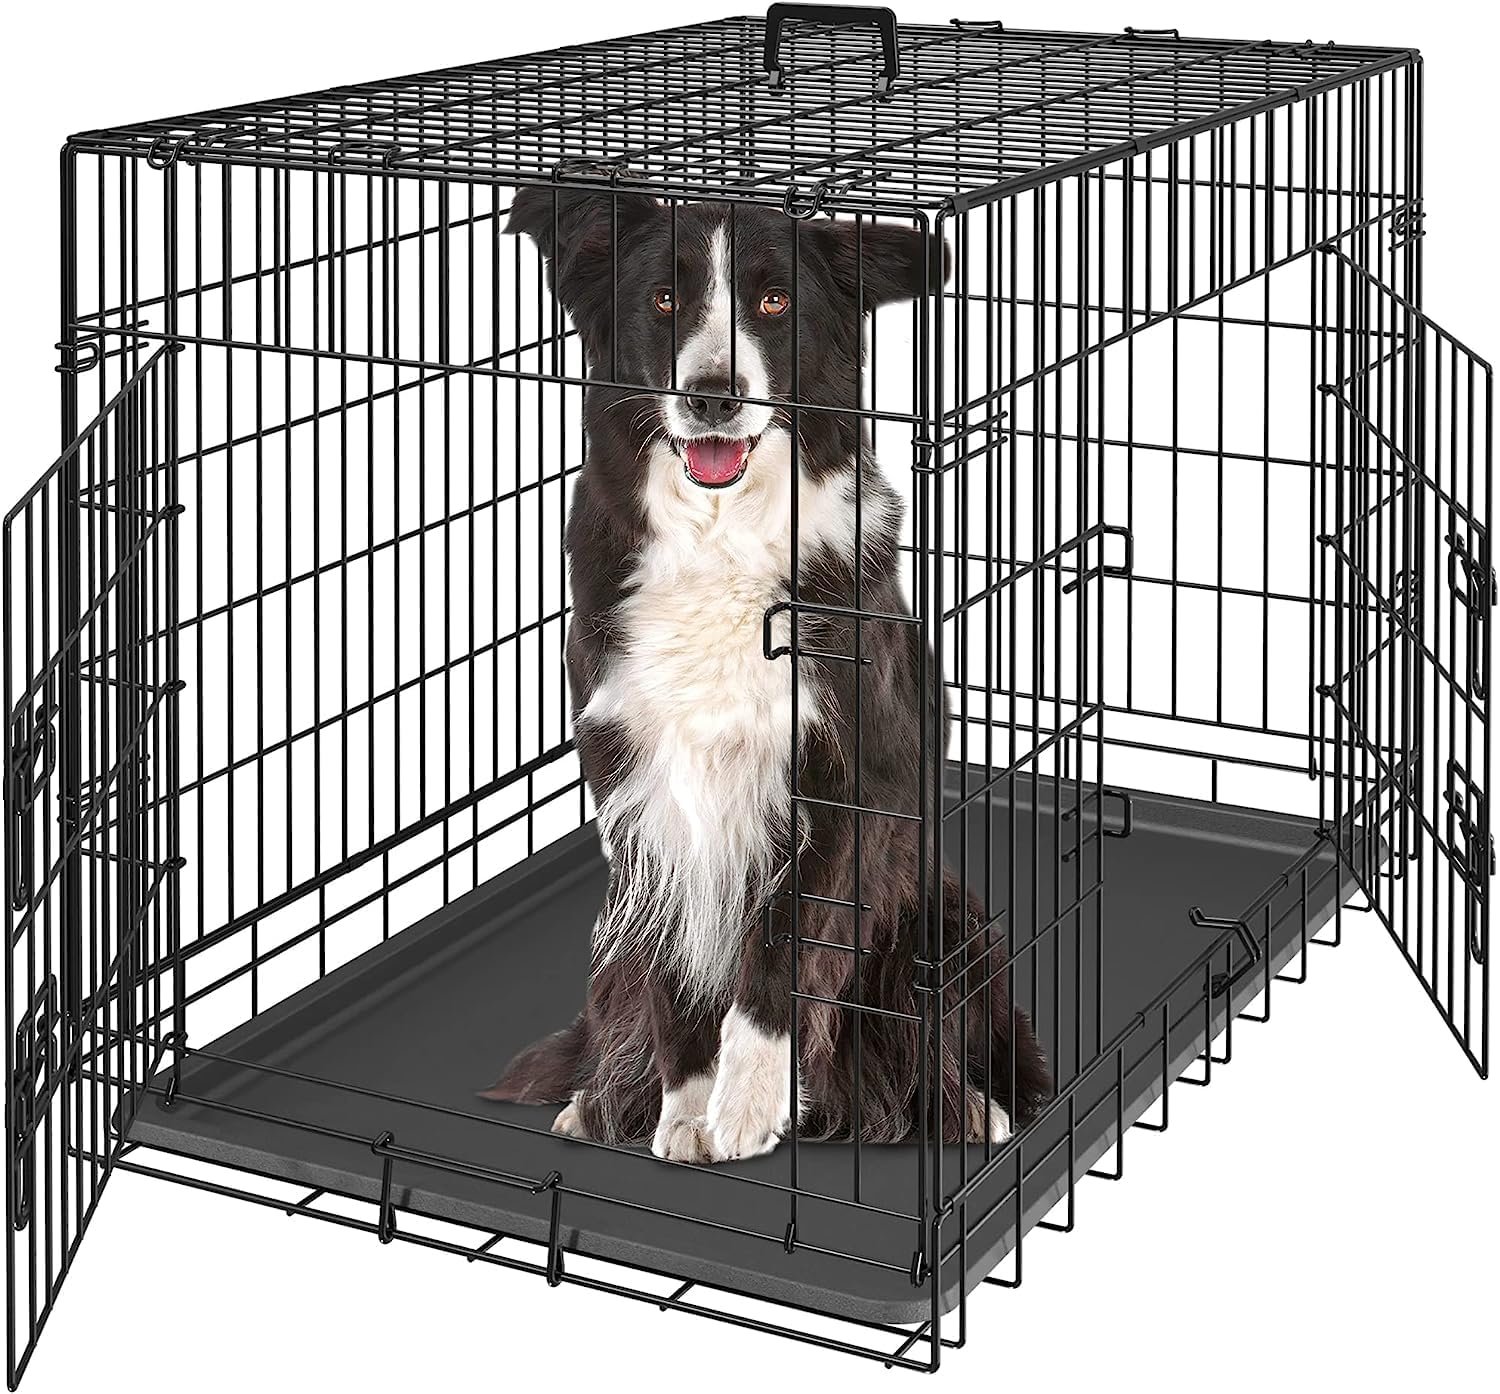 ZENY Dog Crate Review